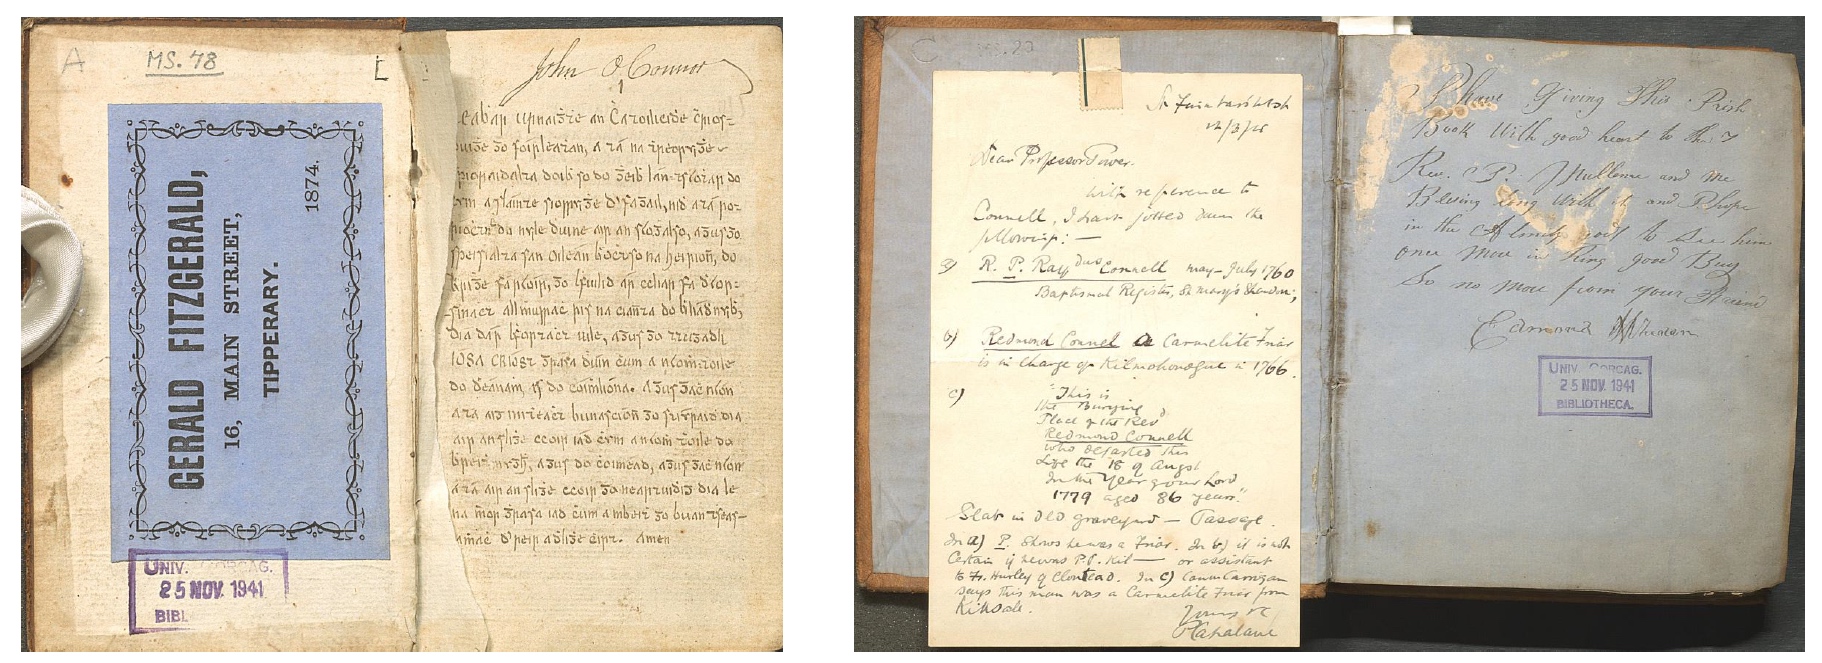 Two images: both manuscripts show the endleaves inside the front cover. The left image shows a ticket for a Gerald Fitzgerald of Main Street Tipperary and the stamped date UCC Library acquired the manuscript: 25 Nov 1941. The right image shows a letter stuck to the front pastedown and an inscription from Edmond (?).